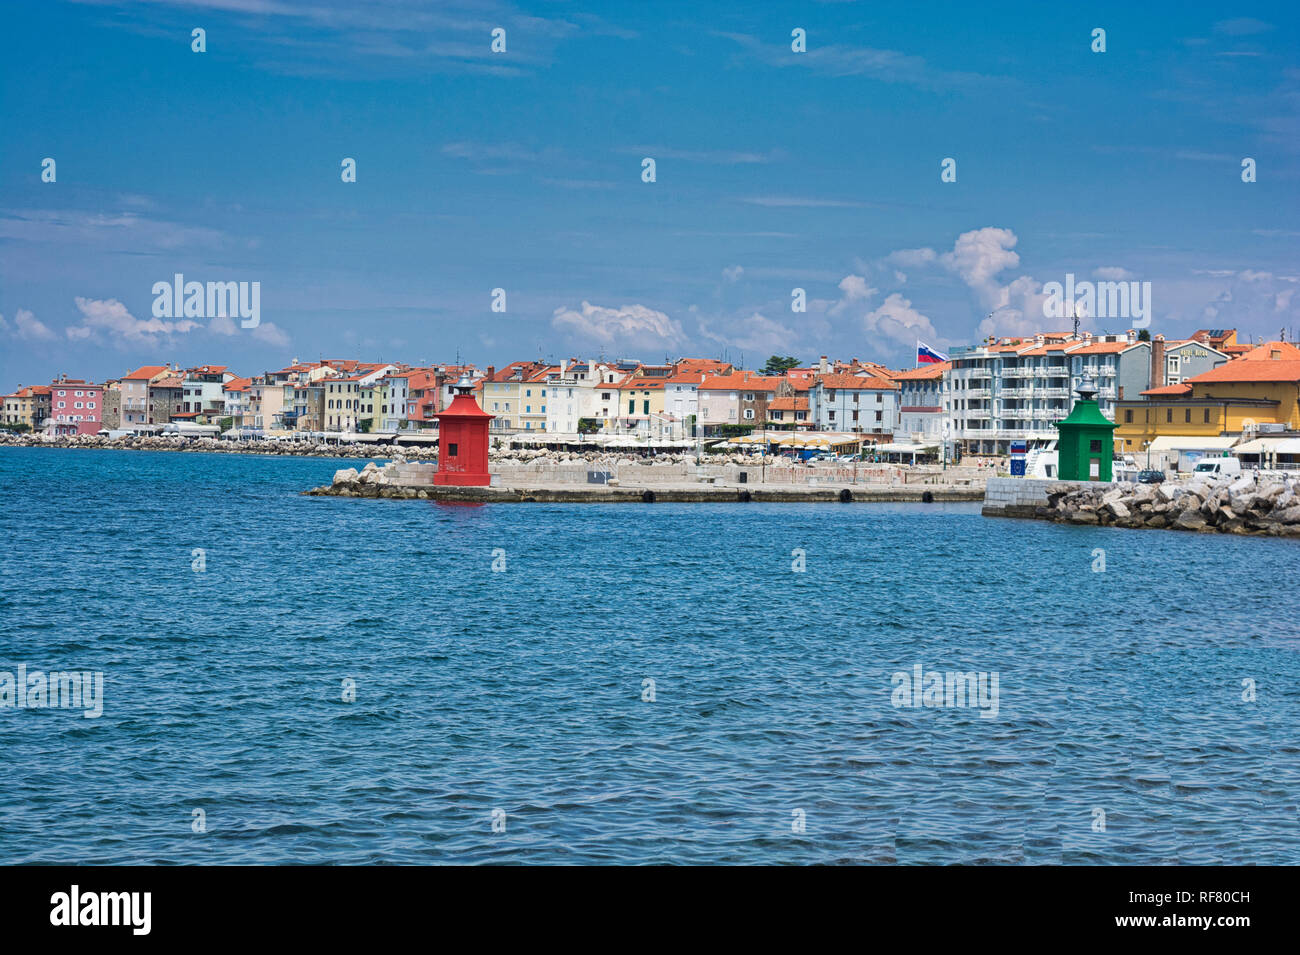 Piran, Slovenia. Image of the Port of Old Slovenian town Piran. Port of Piran in Slovenia - Image Stock Photo